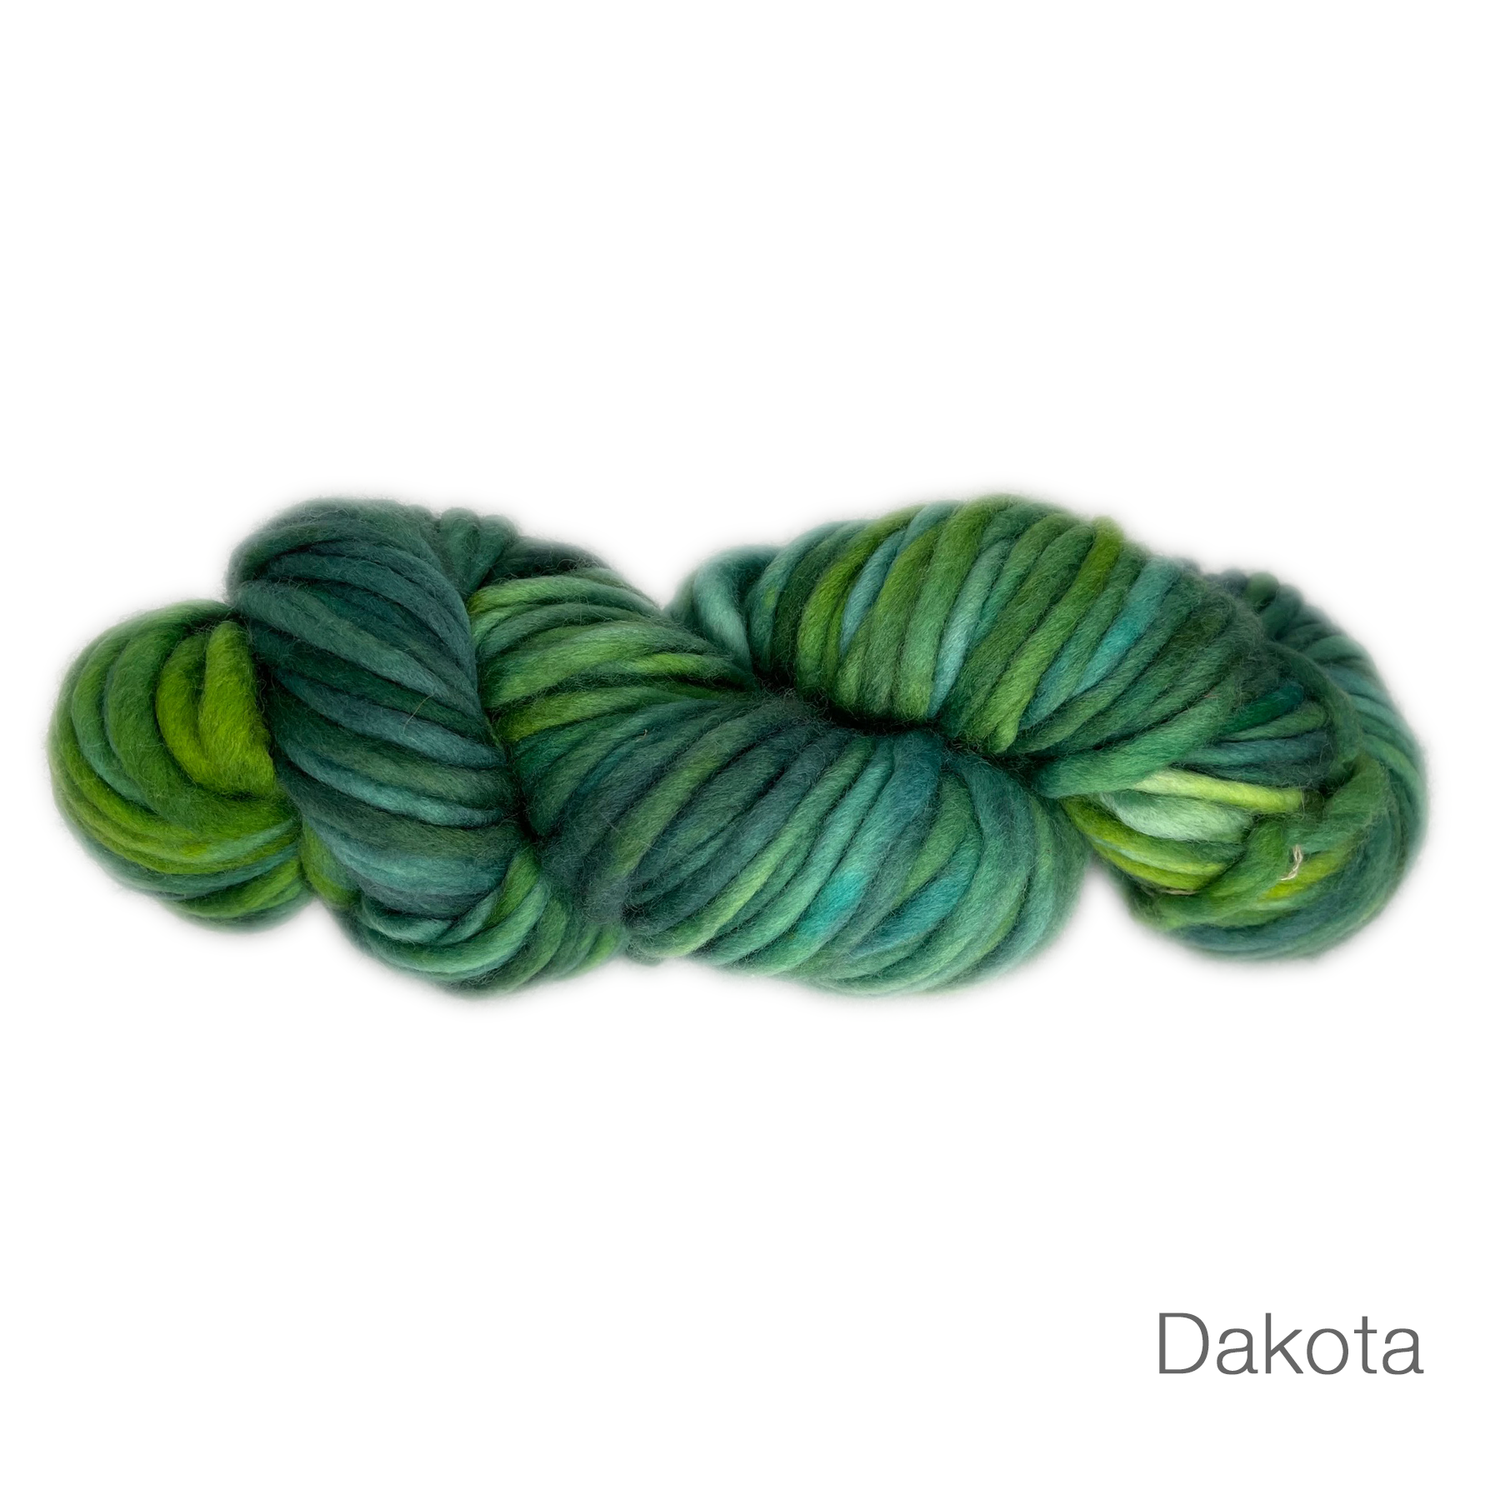 A green super chunky merino wool hand-dyed by Inspireamind